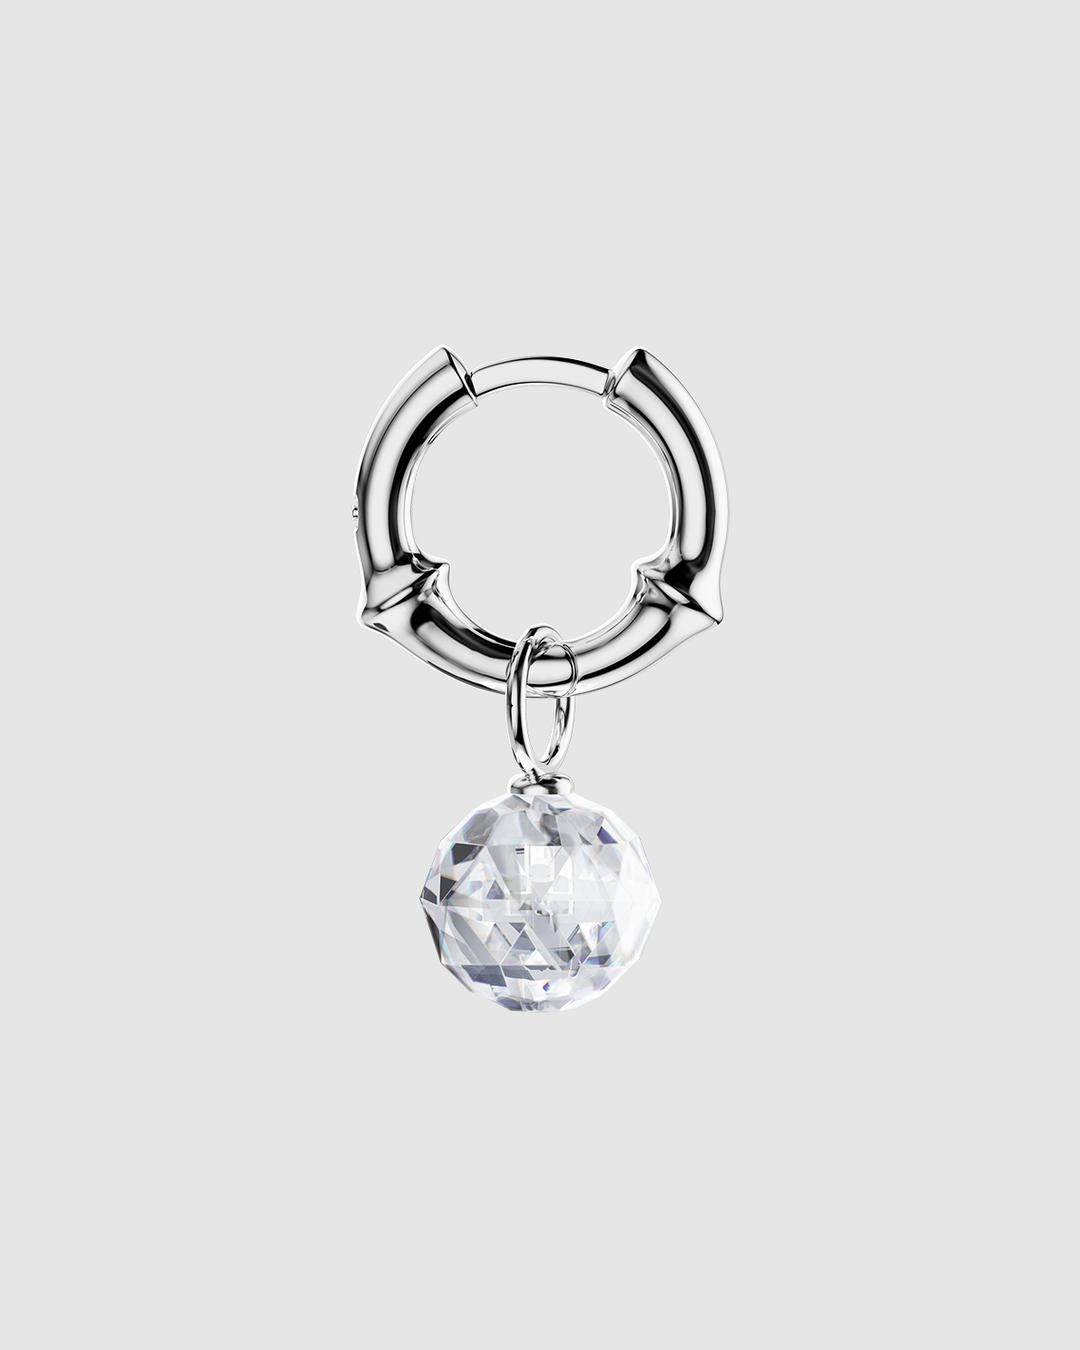 The Fortune Telling Ball Earring